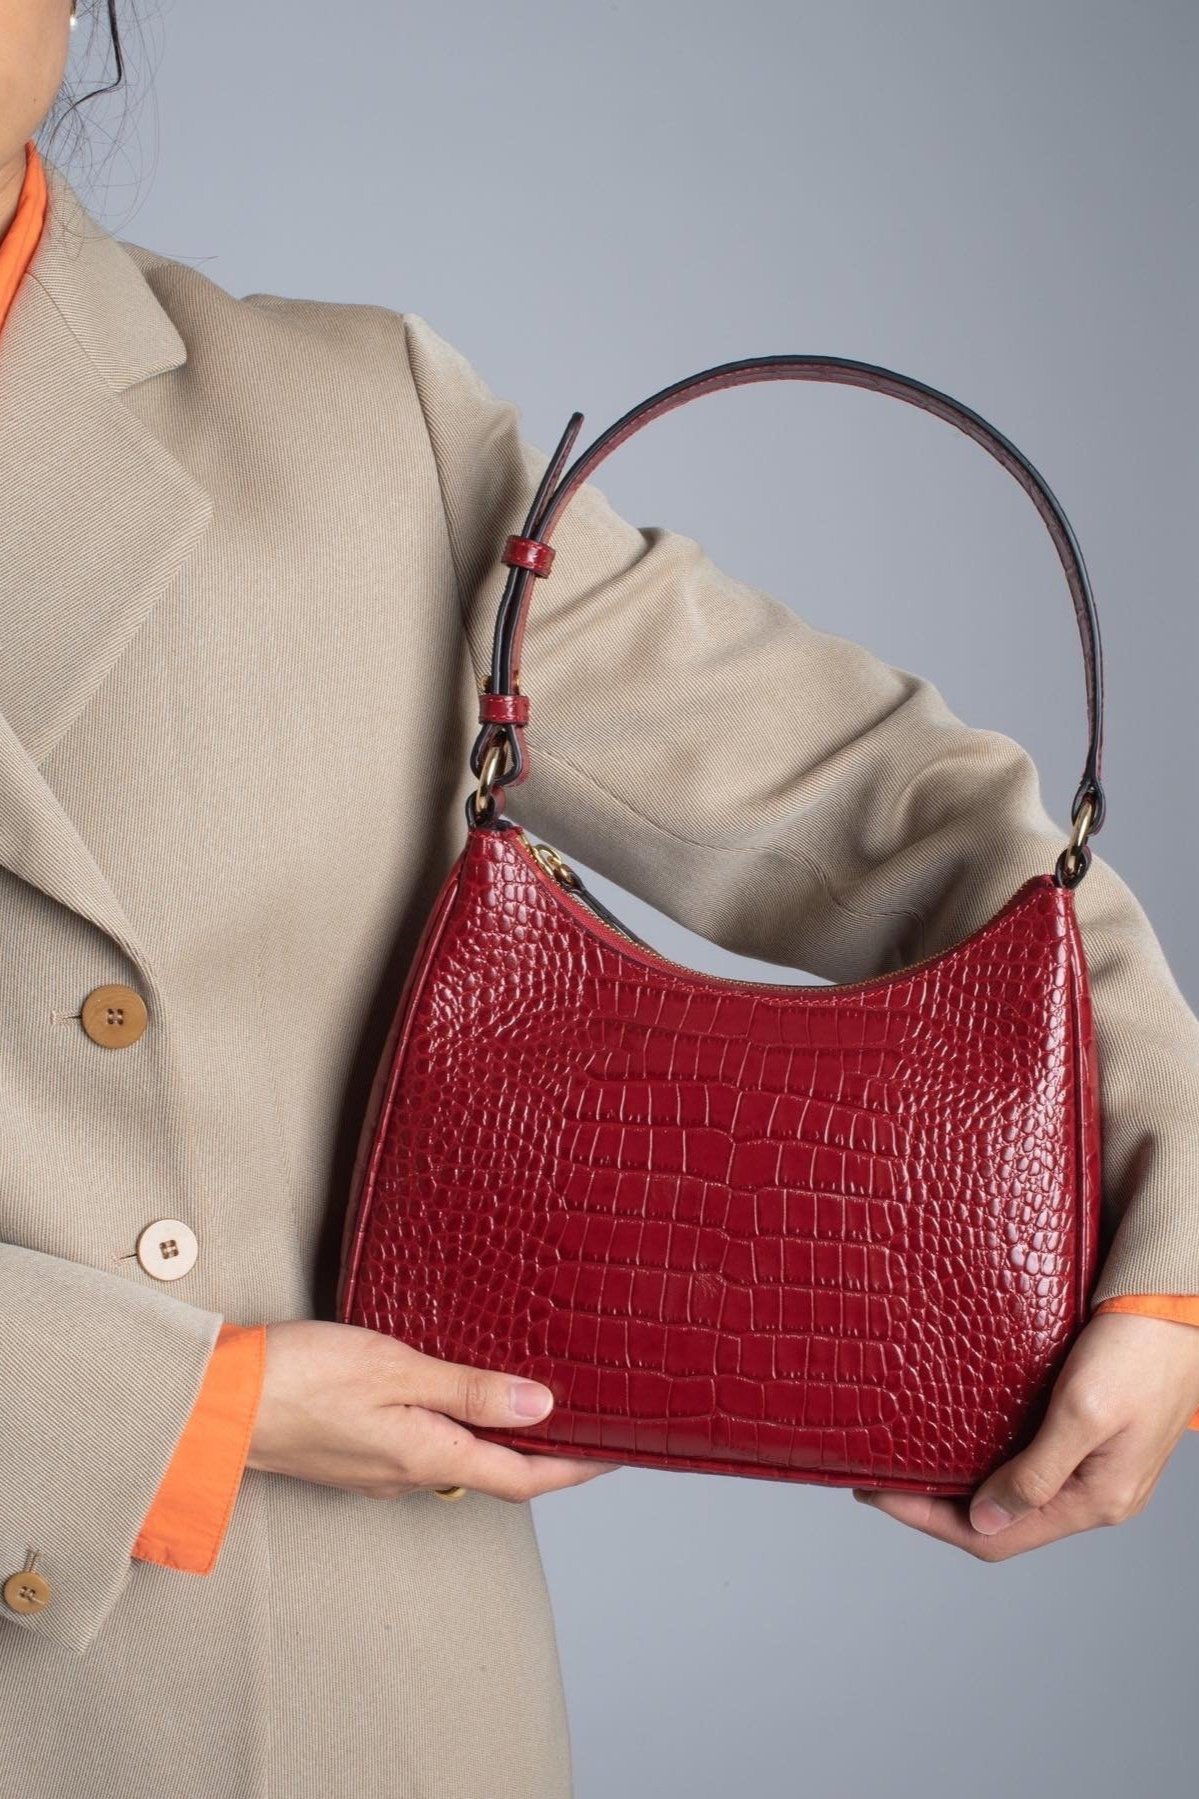 12 Sustainable & Eco-Friendly Handbag Brands To Carry in 2023